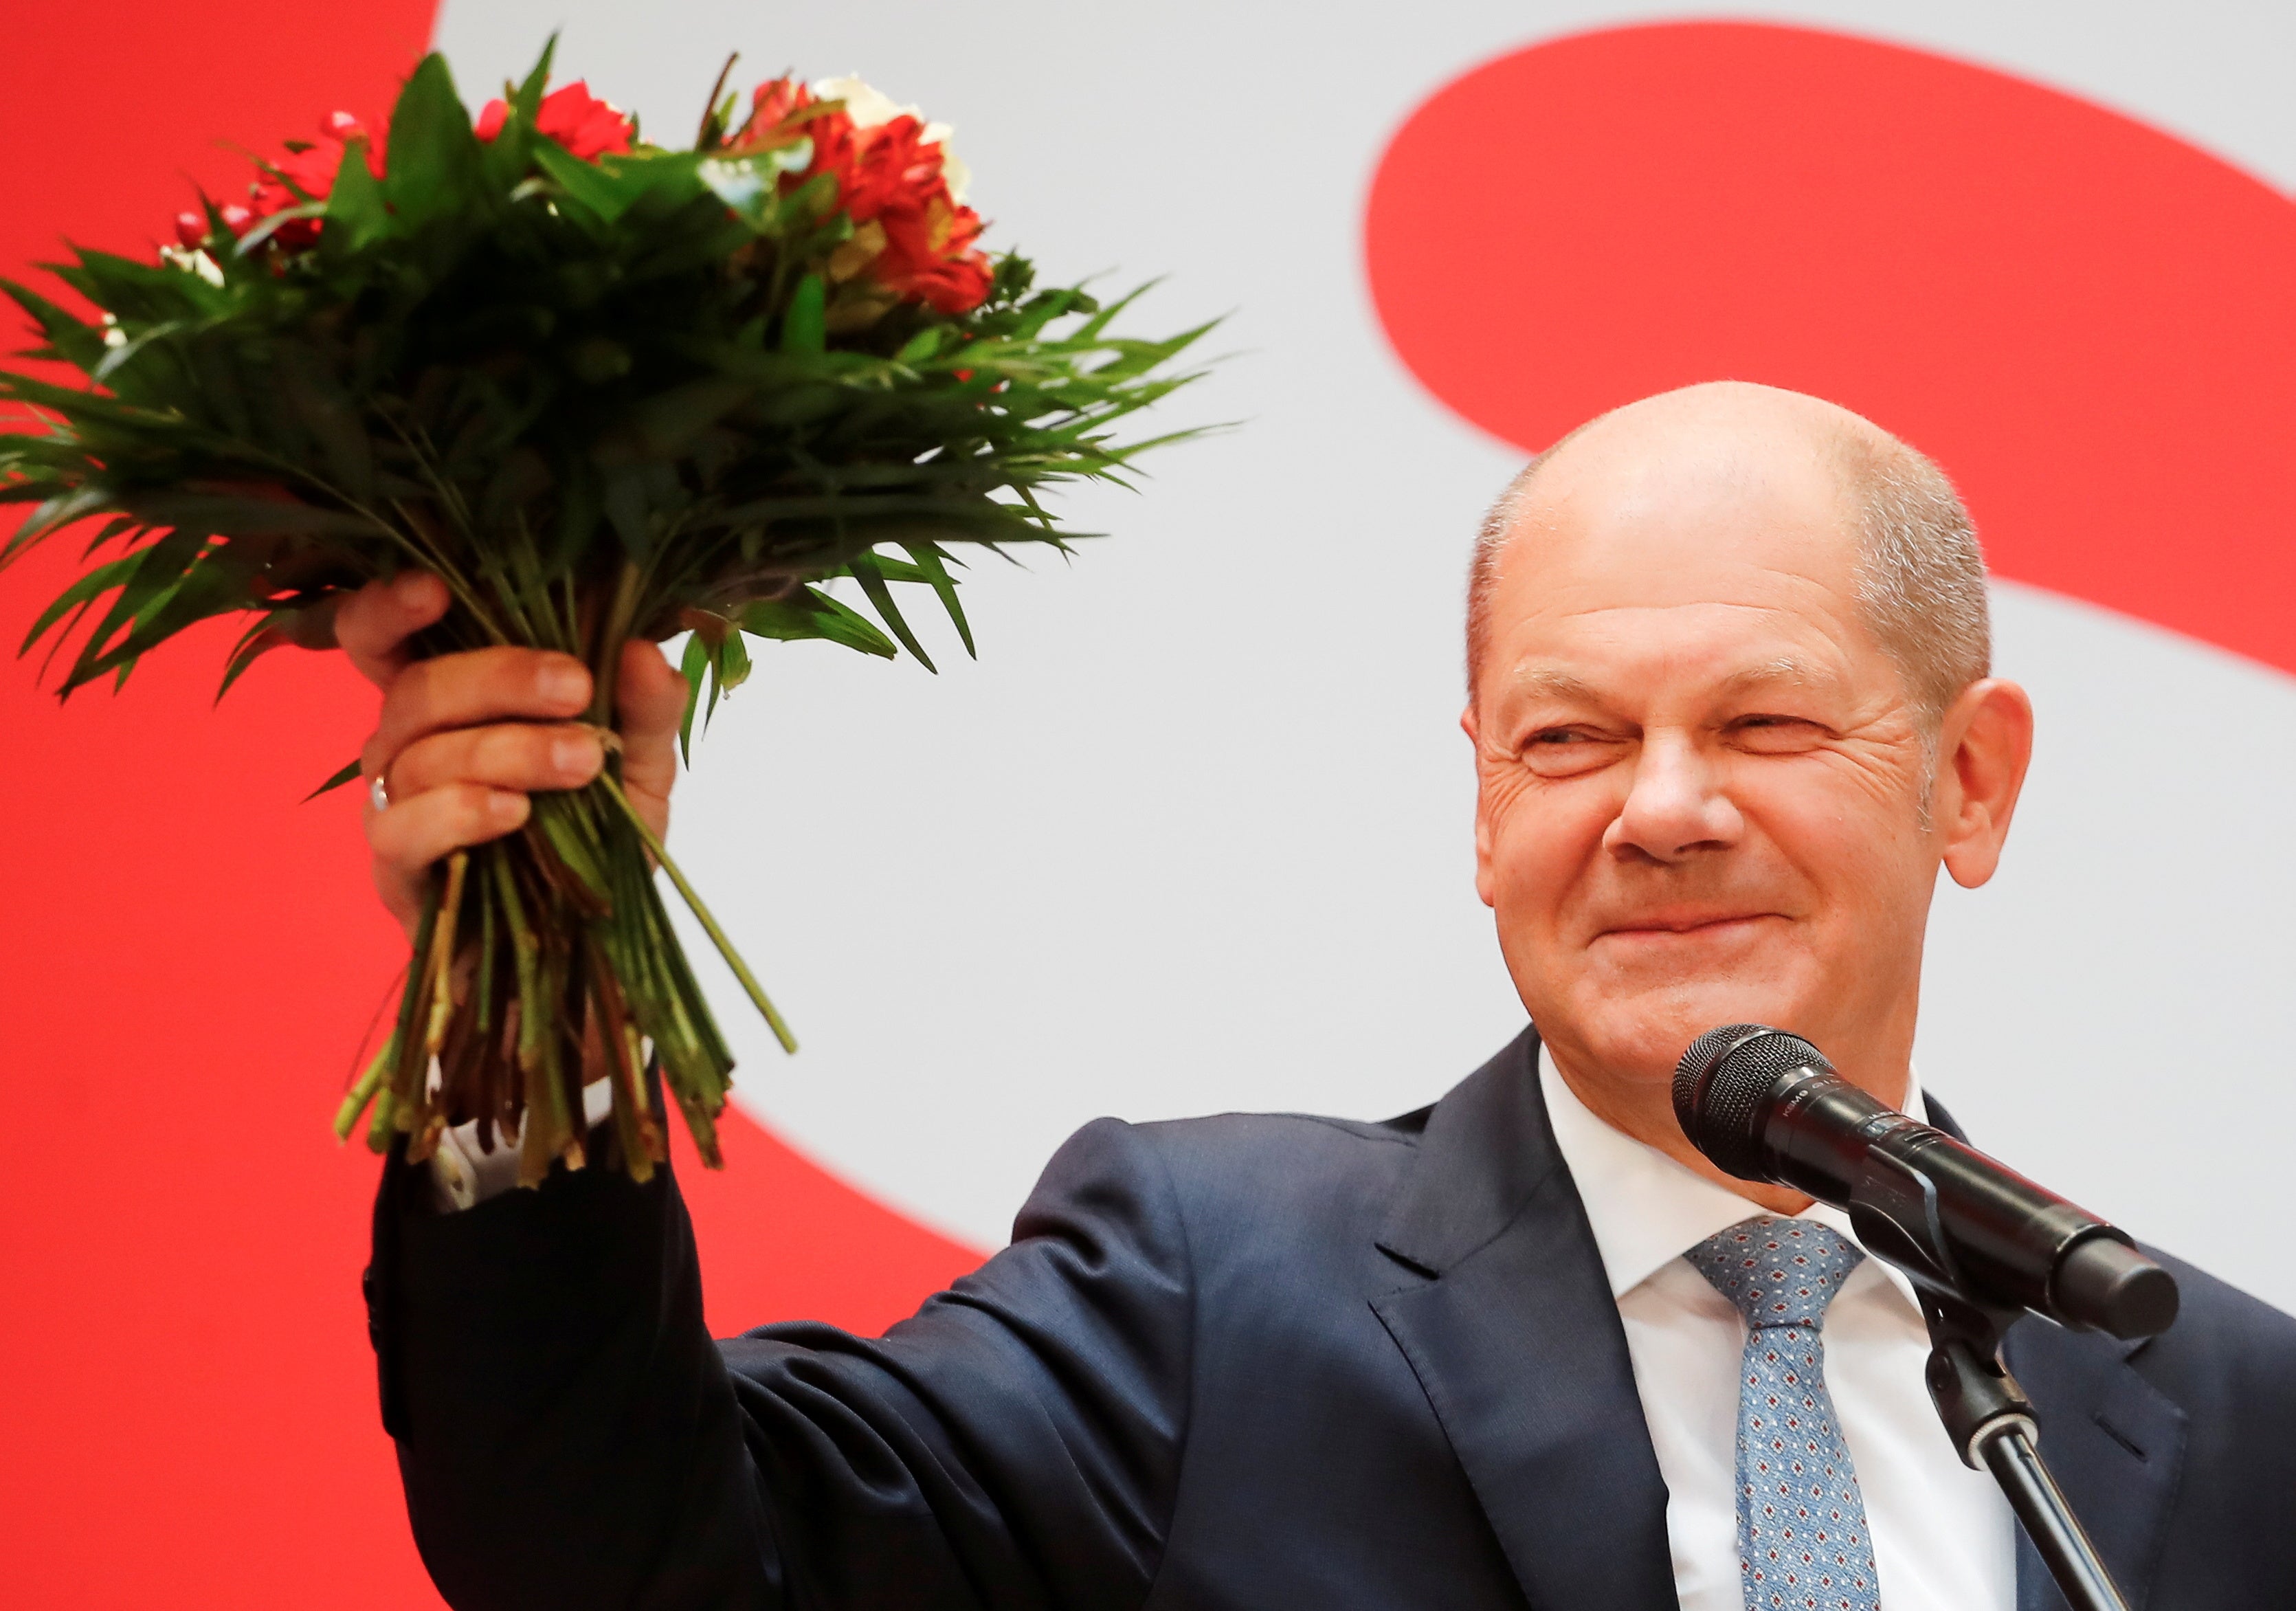 The SPD candidate, Olaf Scholz, will succeed Angela Merkel as chancellor